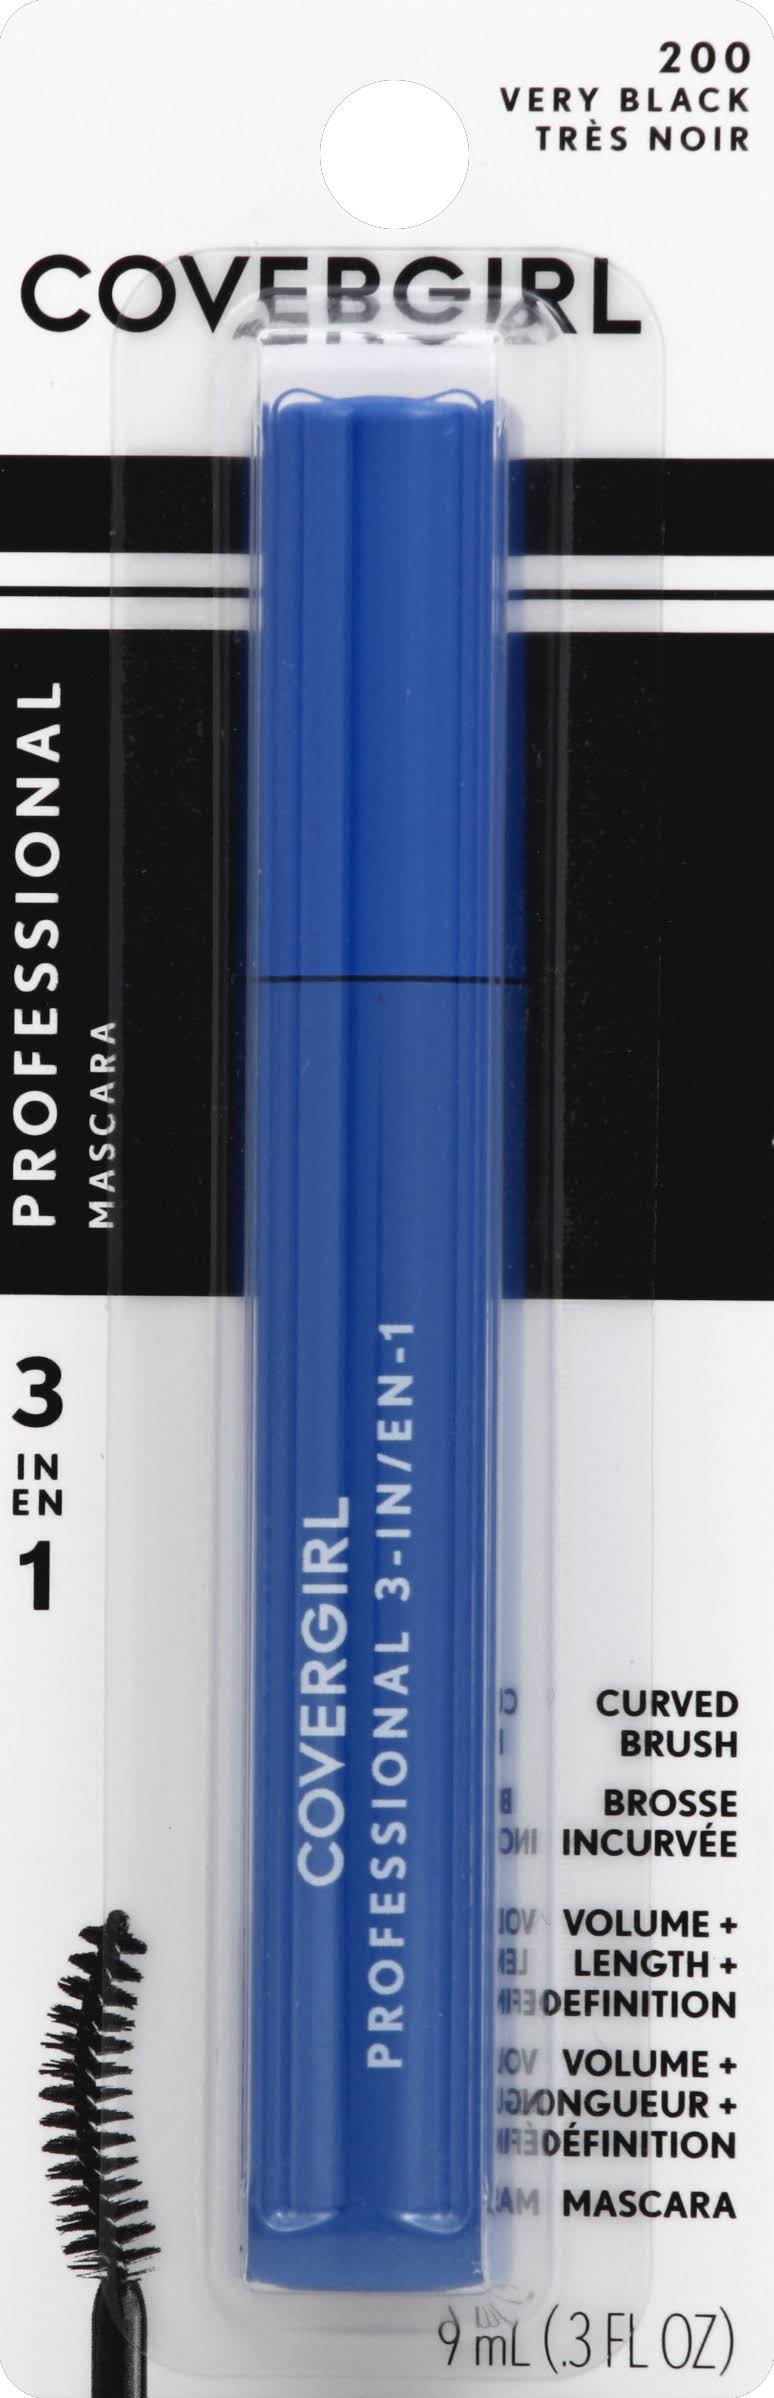 Covergirl Professional 3-In-1 Curved Brush Mascara - 9ml, 200 Very Black